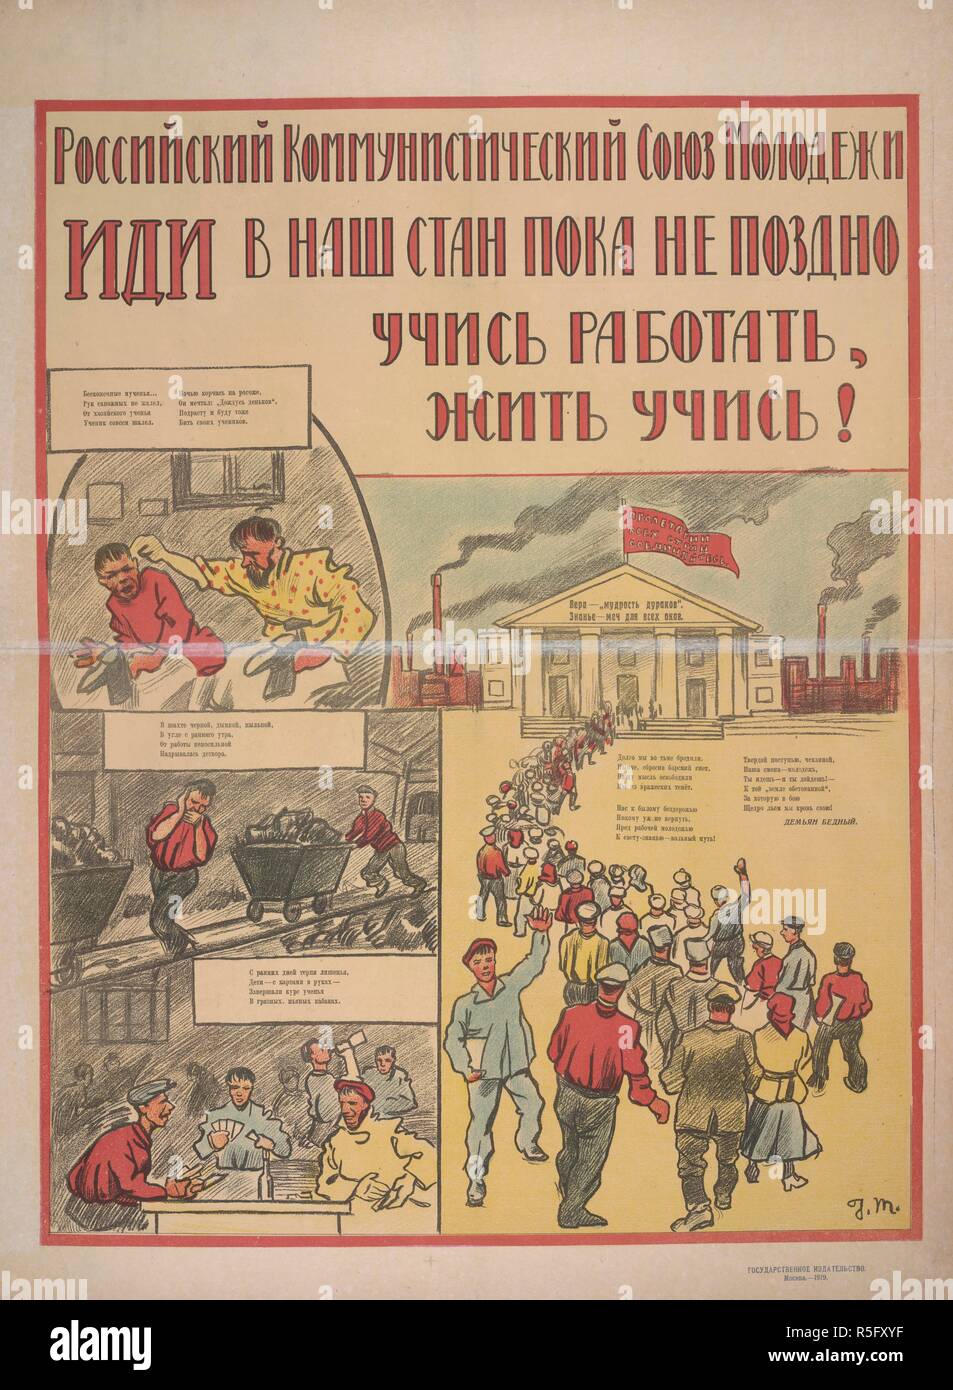 'Idi v nash stan poka ne pozdno uchis rabotat, zhit uchis!' (Join our side while it is not too late: learn to work, learn to live!). Coloured lithograph. Issued by the Russian Communist Union of Youth. A collection of posters issued by the Soviet Soviet government, 1918-1921. Moscow: Gosizdat. Issued by the Russian Communist Union of Youth, 1919. Coloured lithograph. . Source: Cup.645.a.6.(5). Language: Russian. Author: Bednyi, Demian. Stock Photo